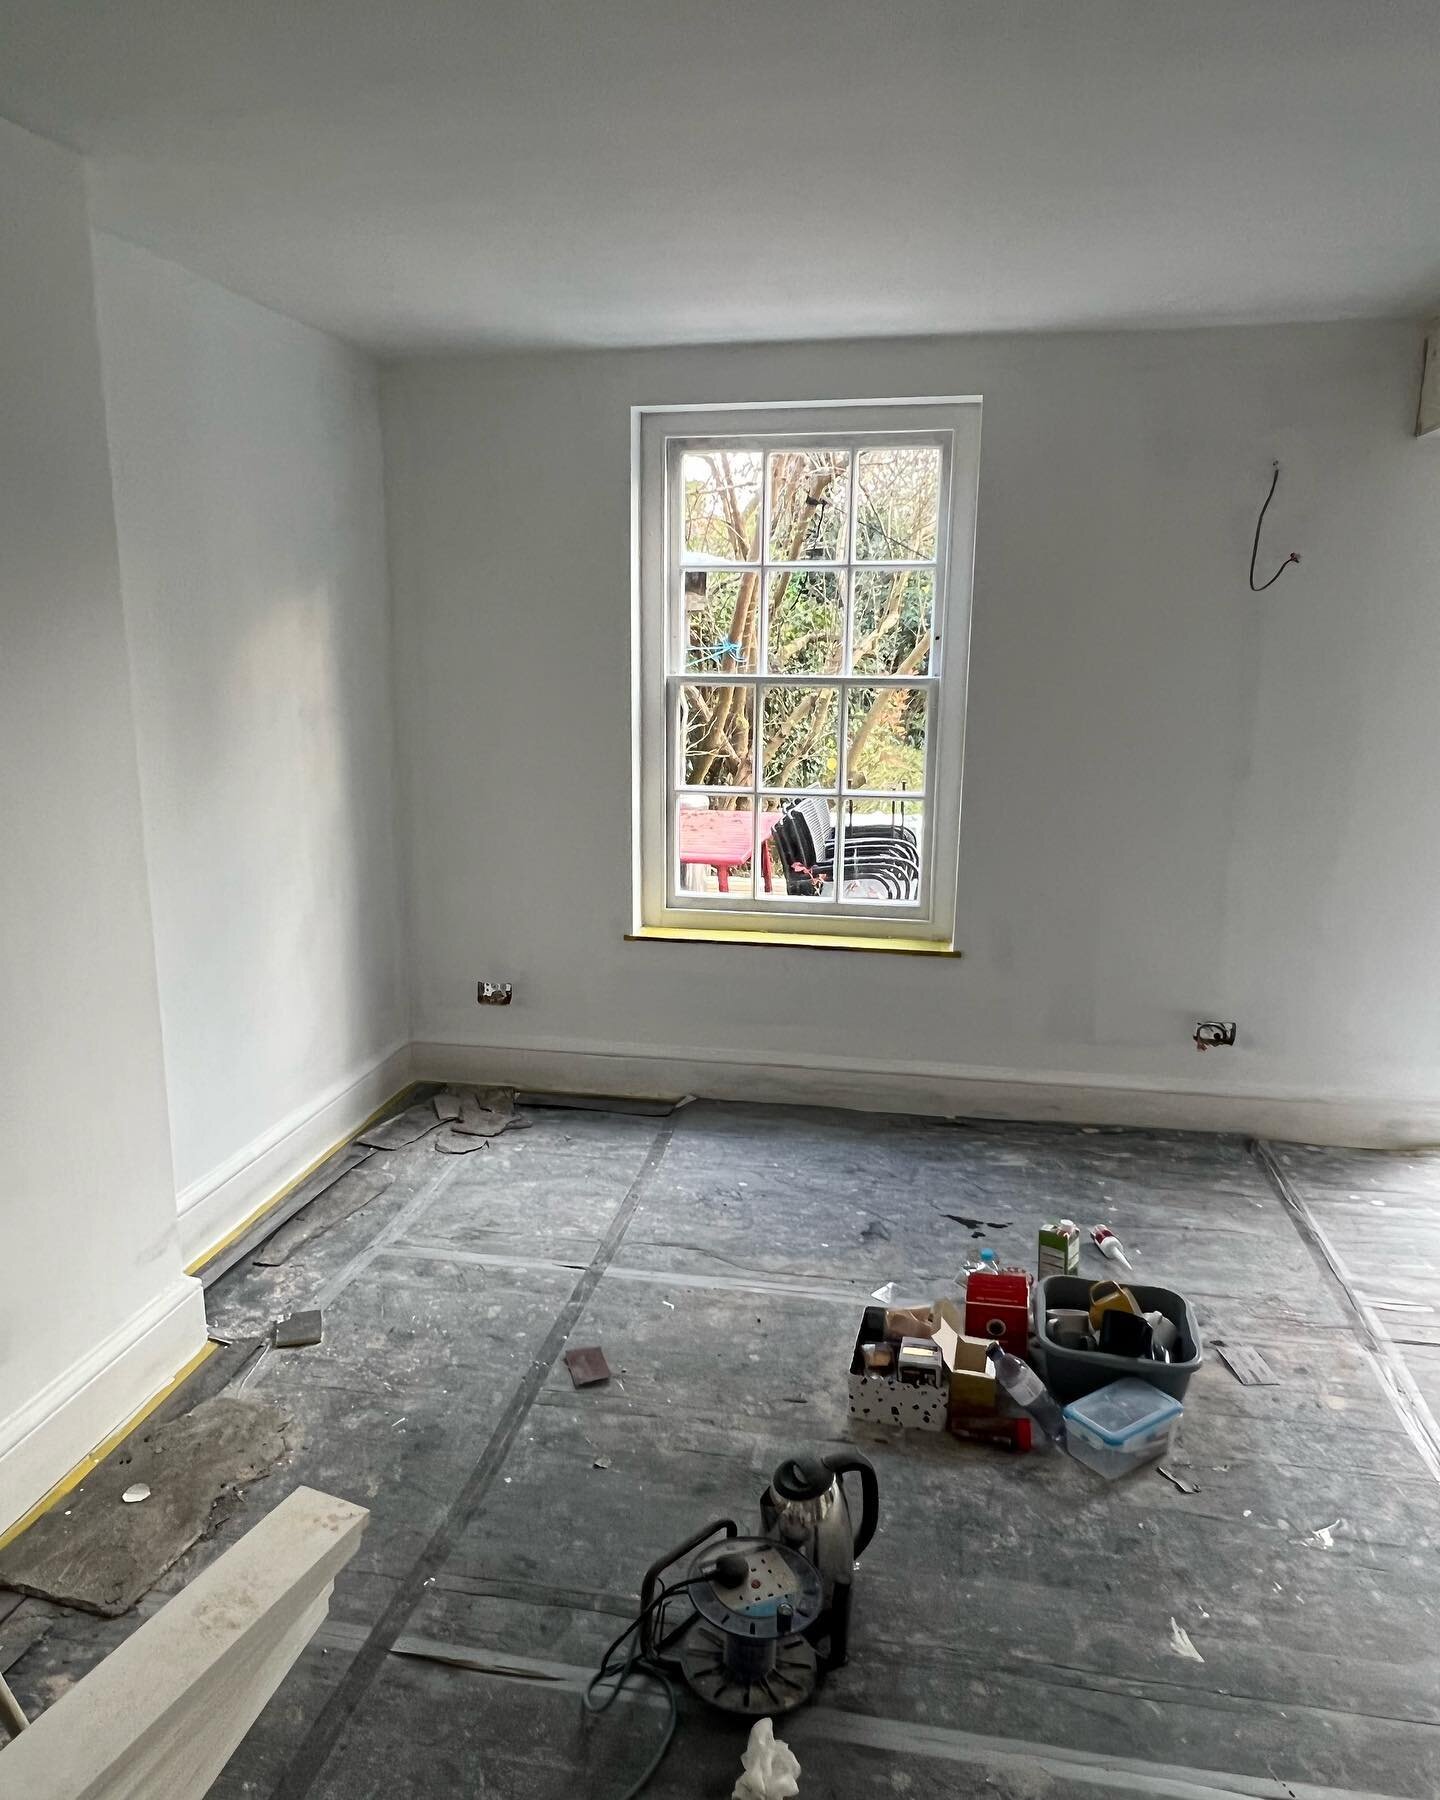 A good few days on our Barton road project with @cb1buildingandcarpentry2 
Bringing areas forward ready for second fixes etc. 

#cambridgedecorating #paintersofinstagram#decoratorsofinstagram #interiordesign #Cambridge #decor #decorate #decorating #d